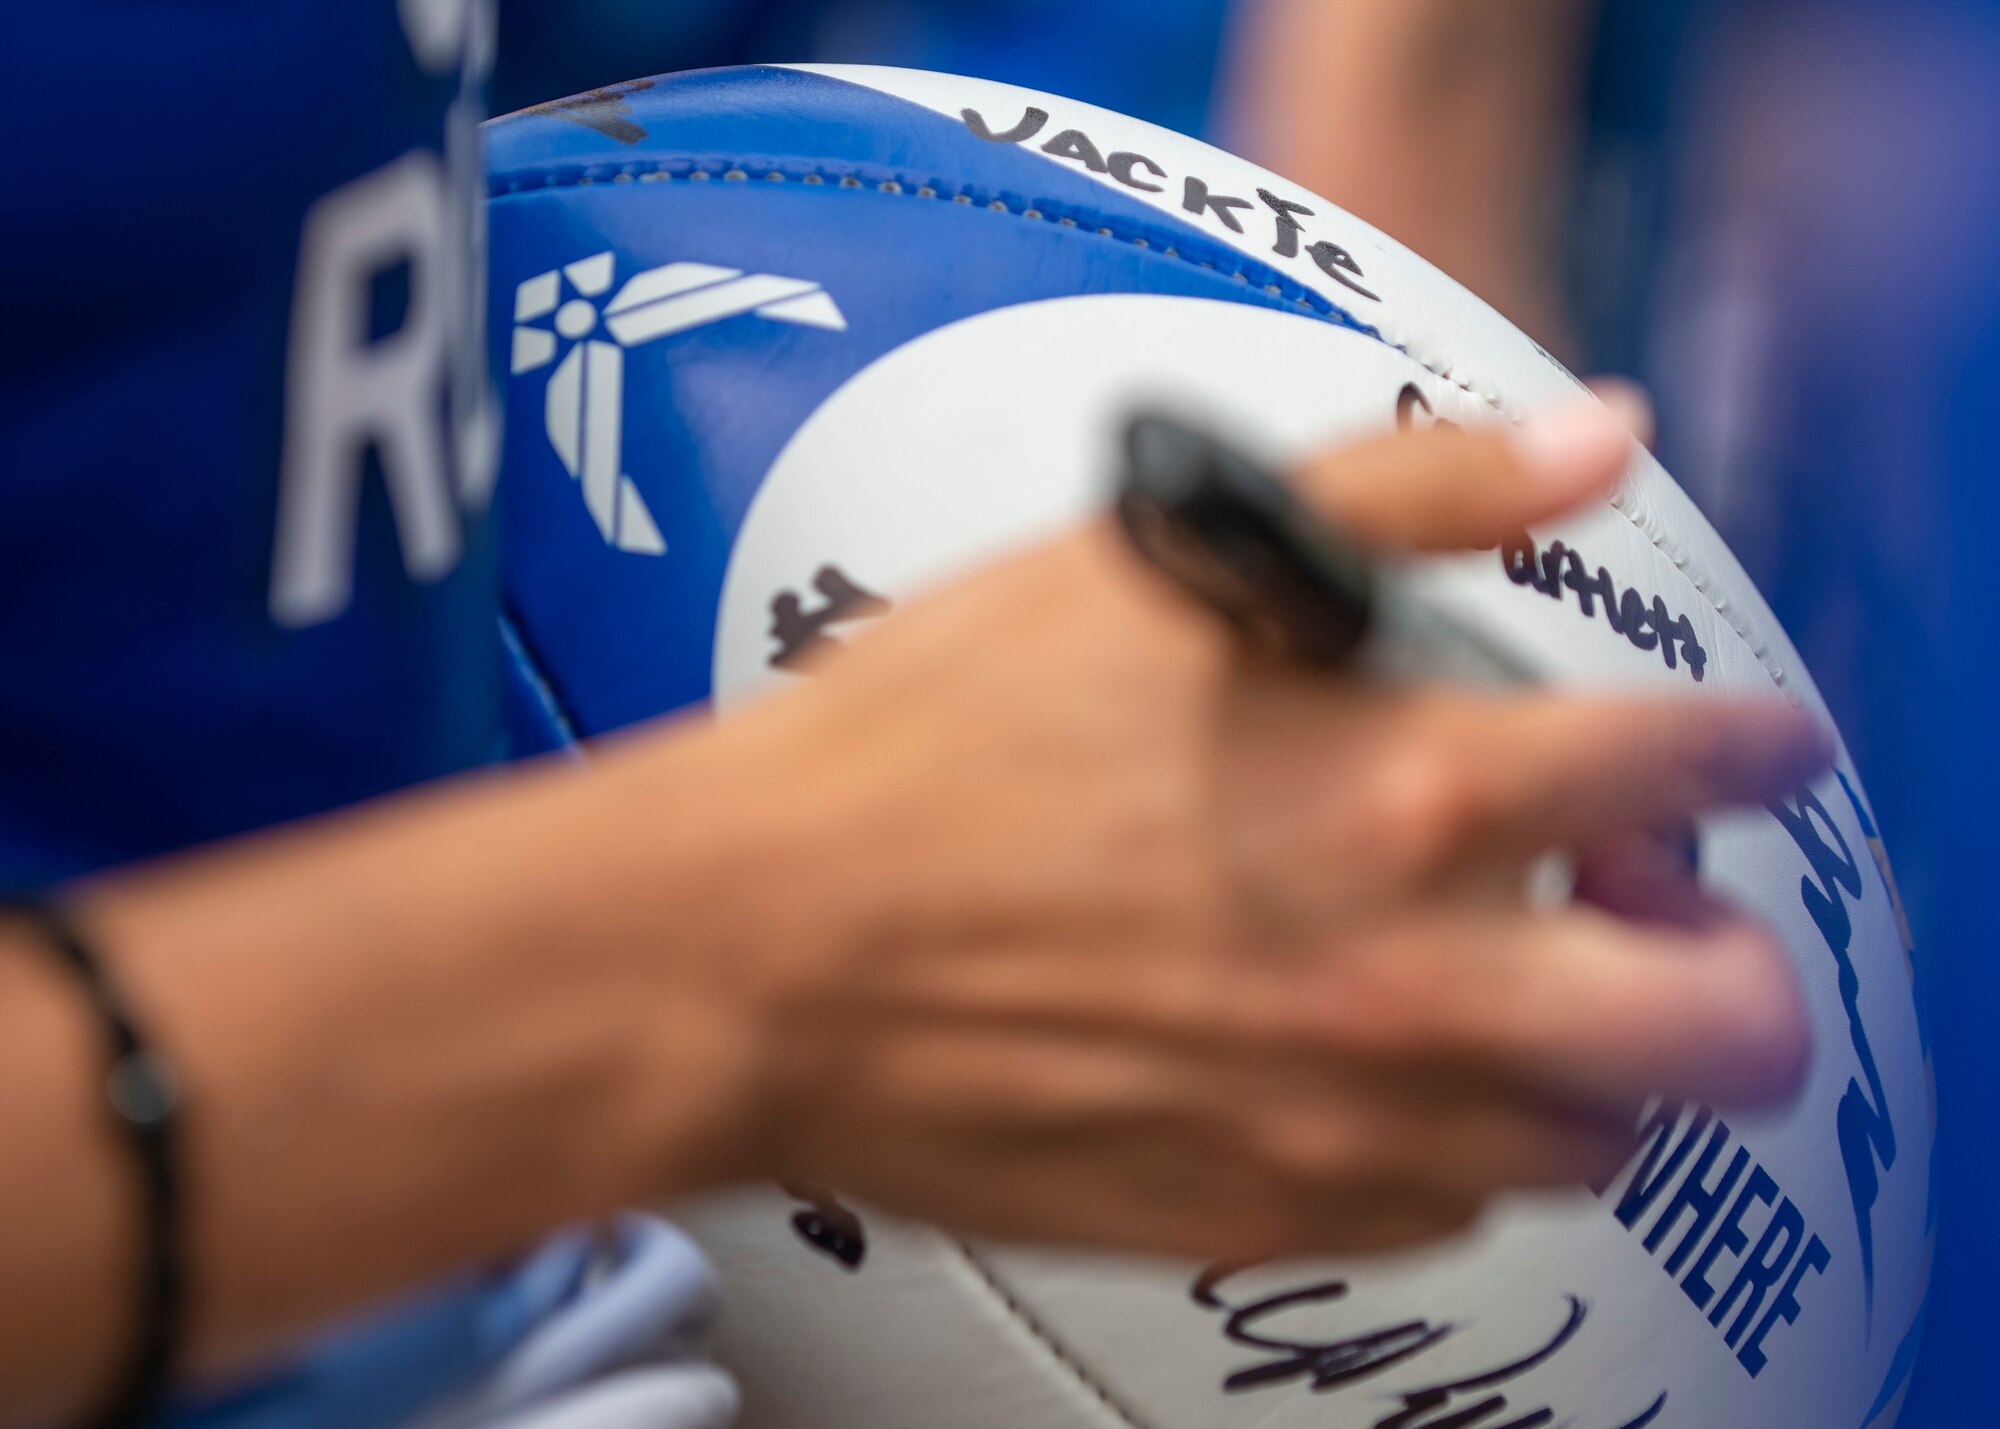 Members of the United States Air Force women’s rugby team sign a ball at the Annual Armed Forces Women’s Rugby Championship in Wilmington, North Carolina, June 26, 2021.